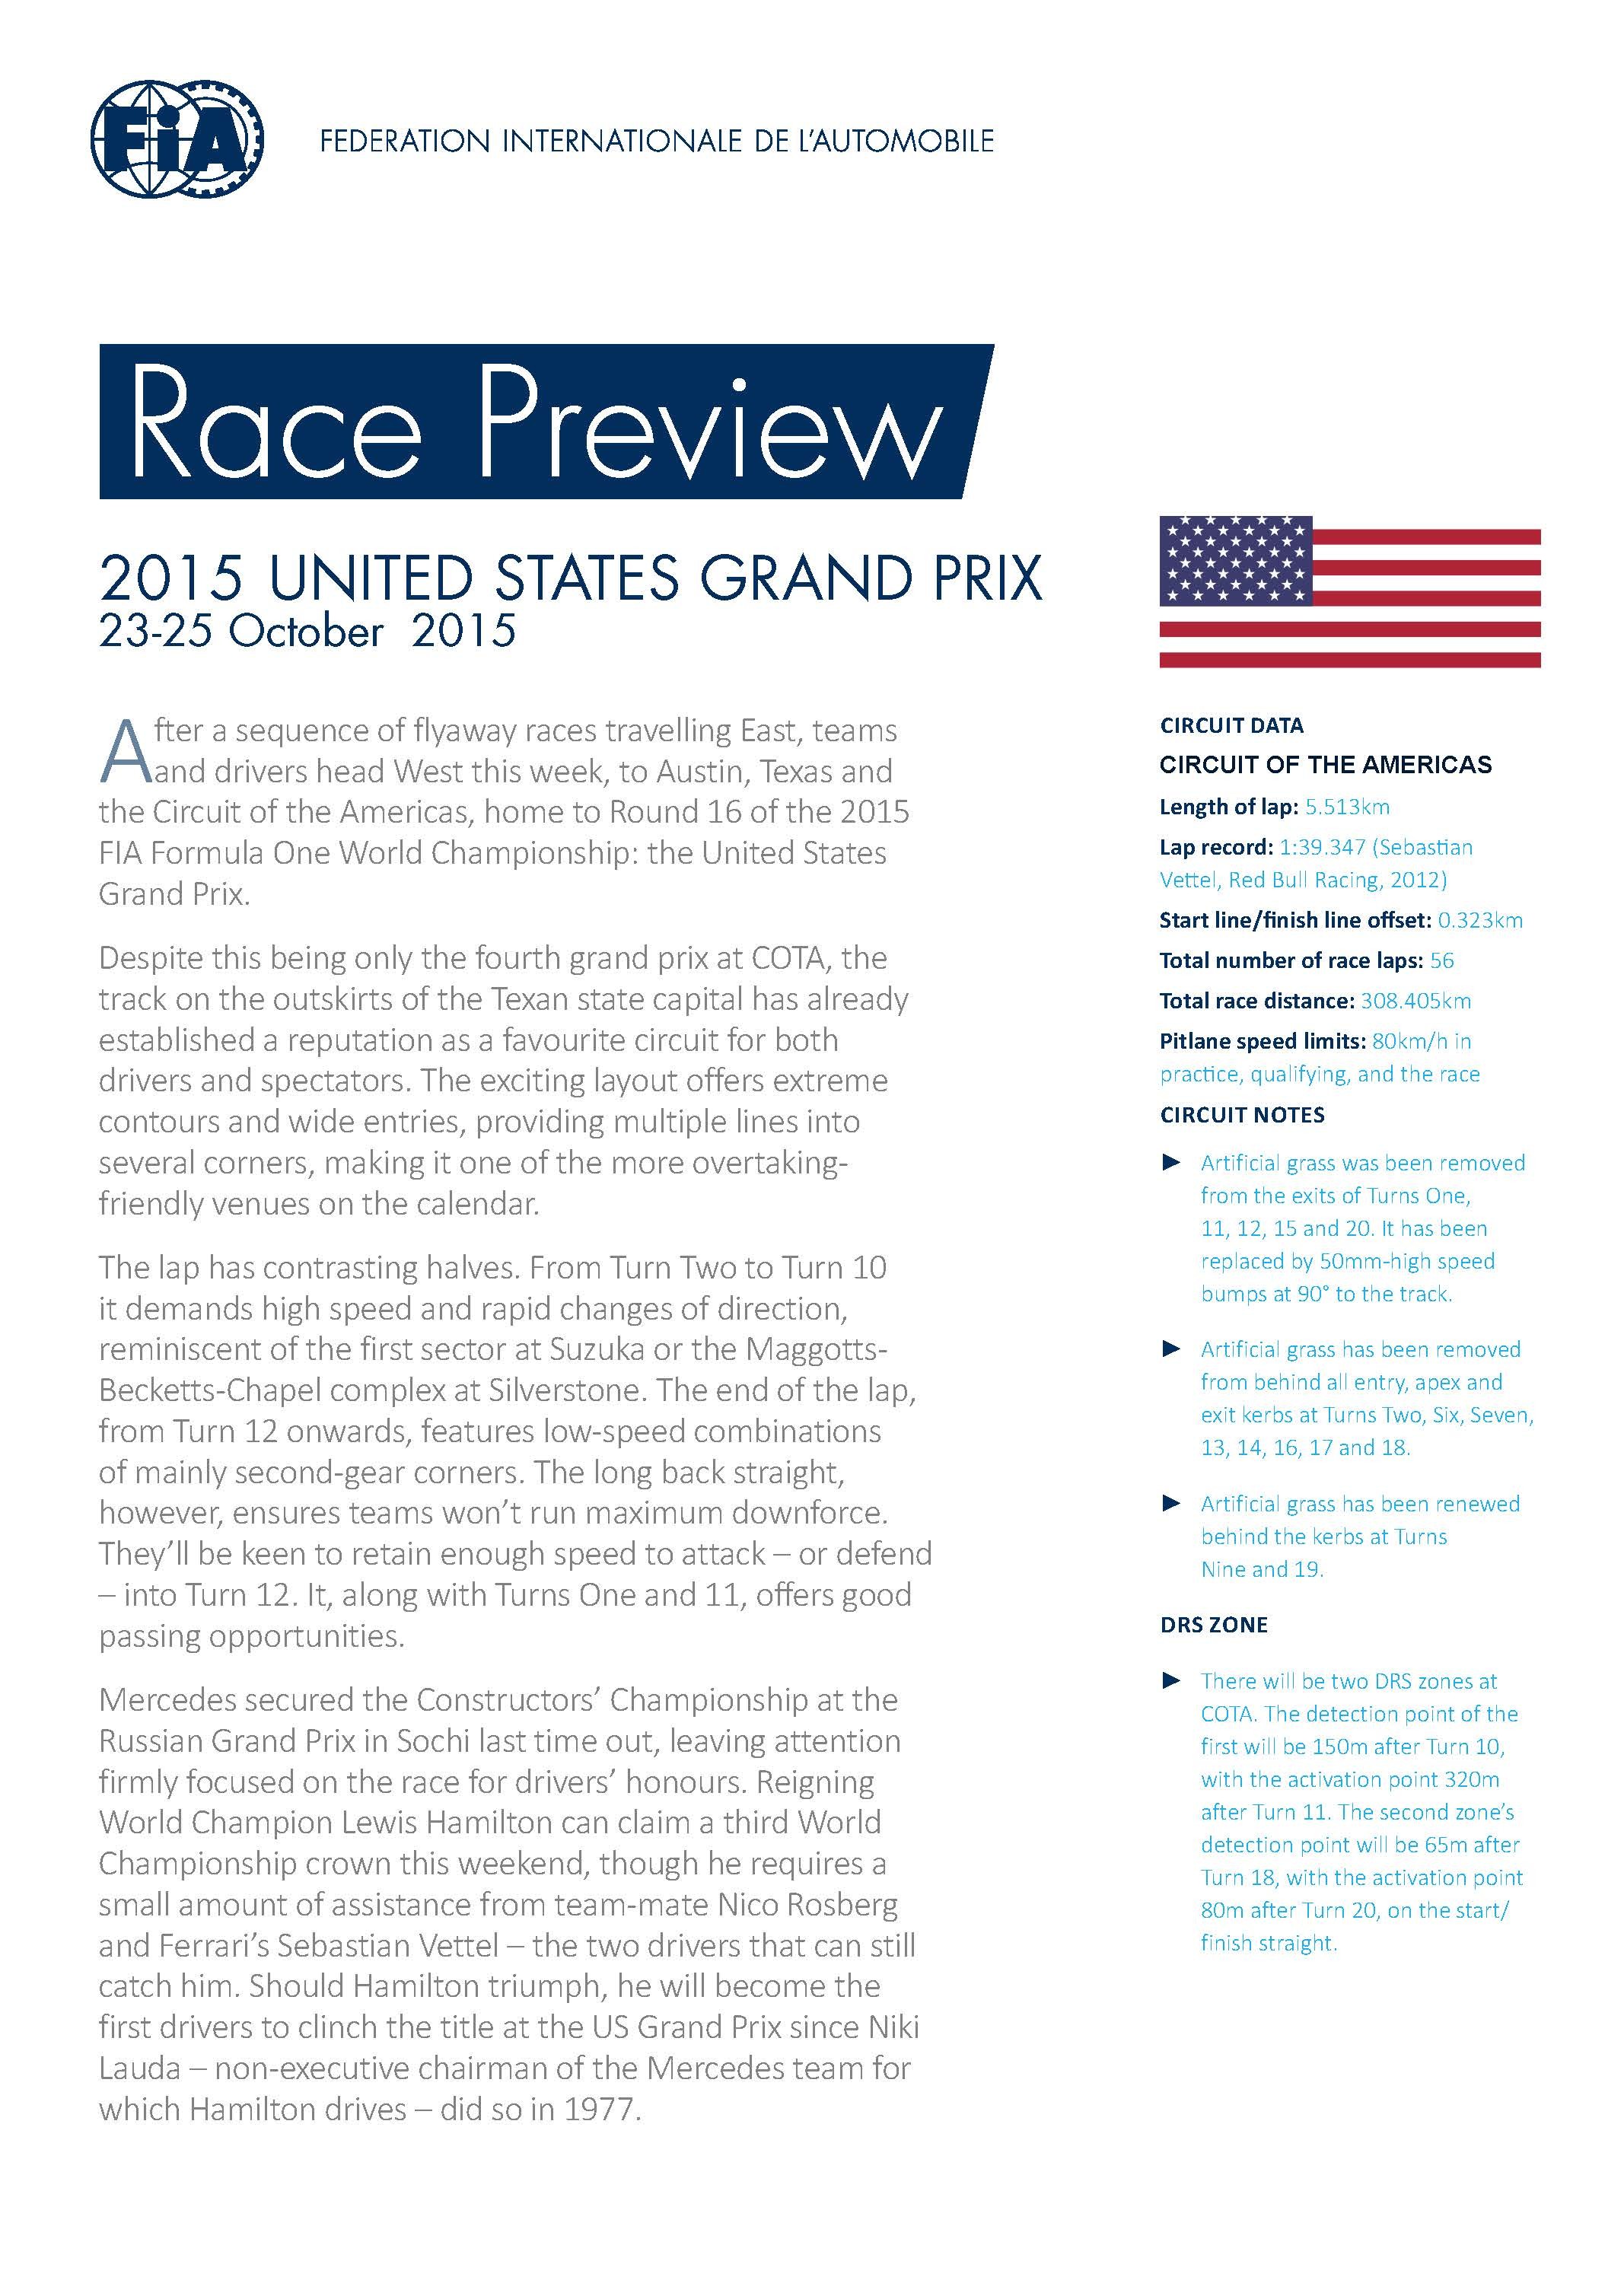 F1 US GP Preview